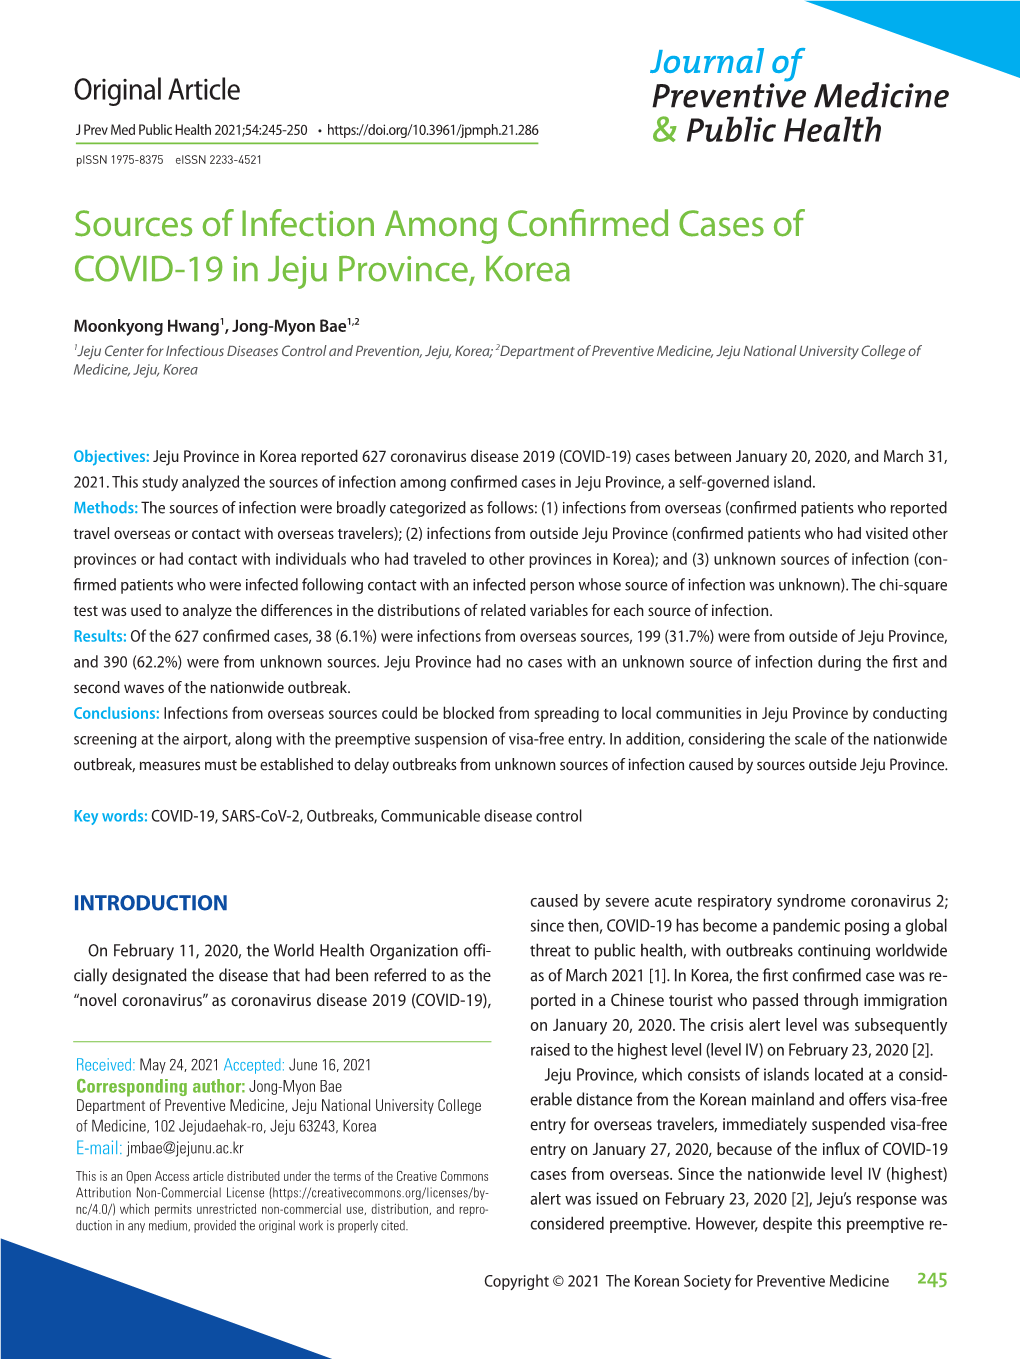 Sources of Infection Among Confirmed Cases of COVID-19 in Jeju Province, Korea